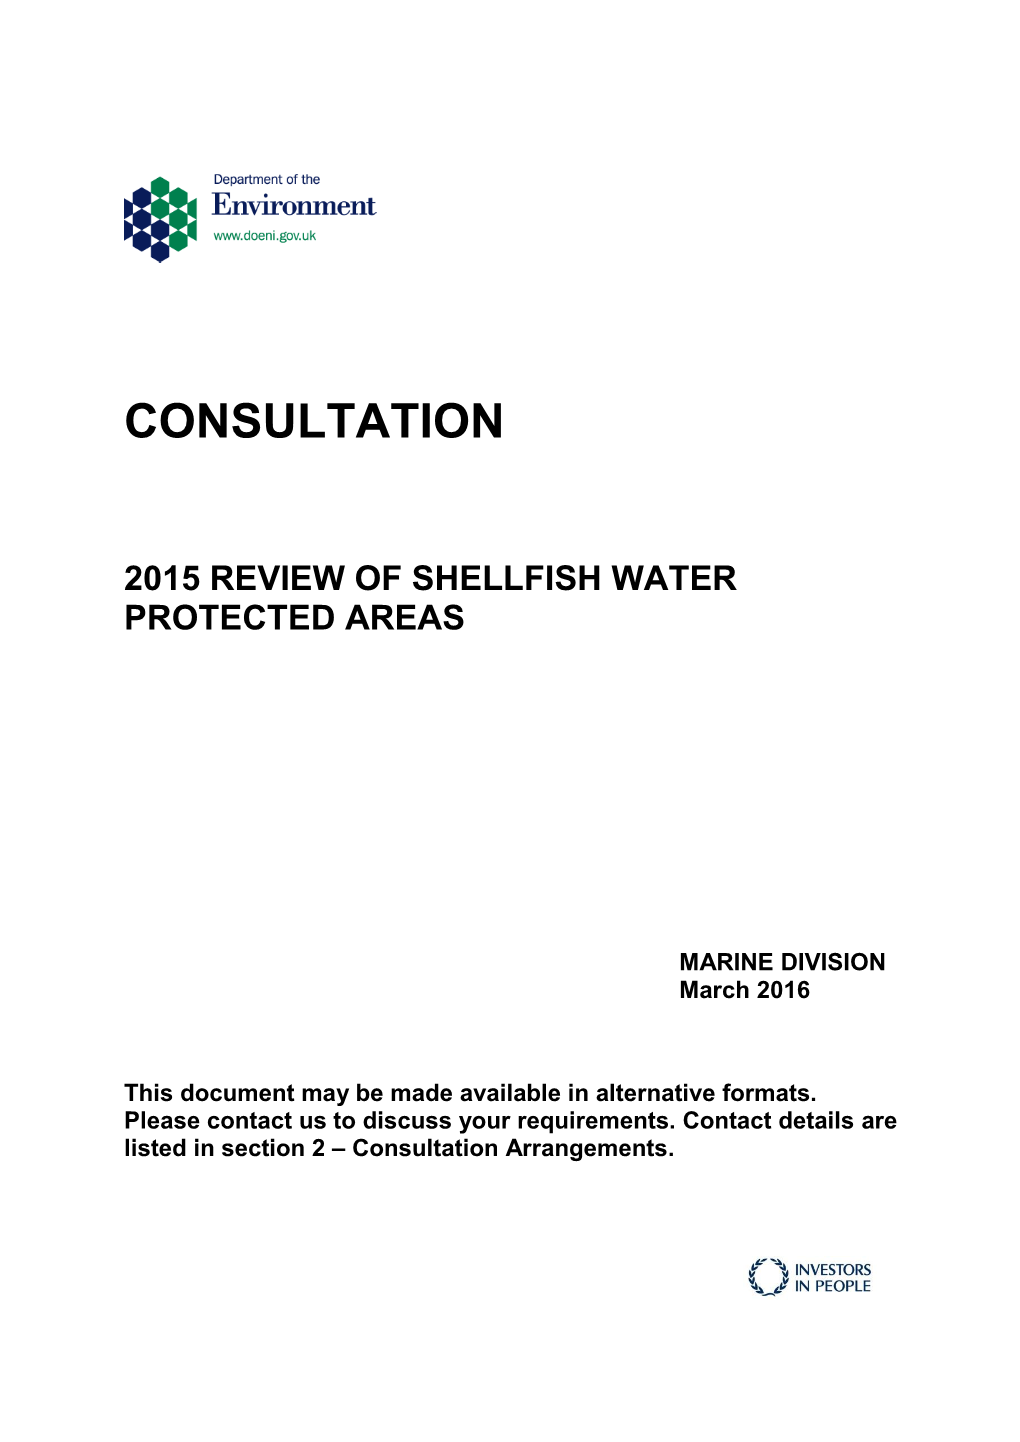 2015 Review of Shellfish Water Protected Areas